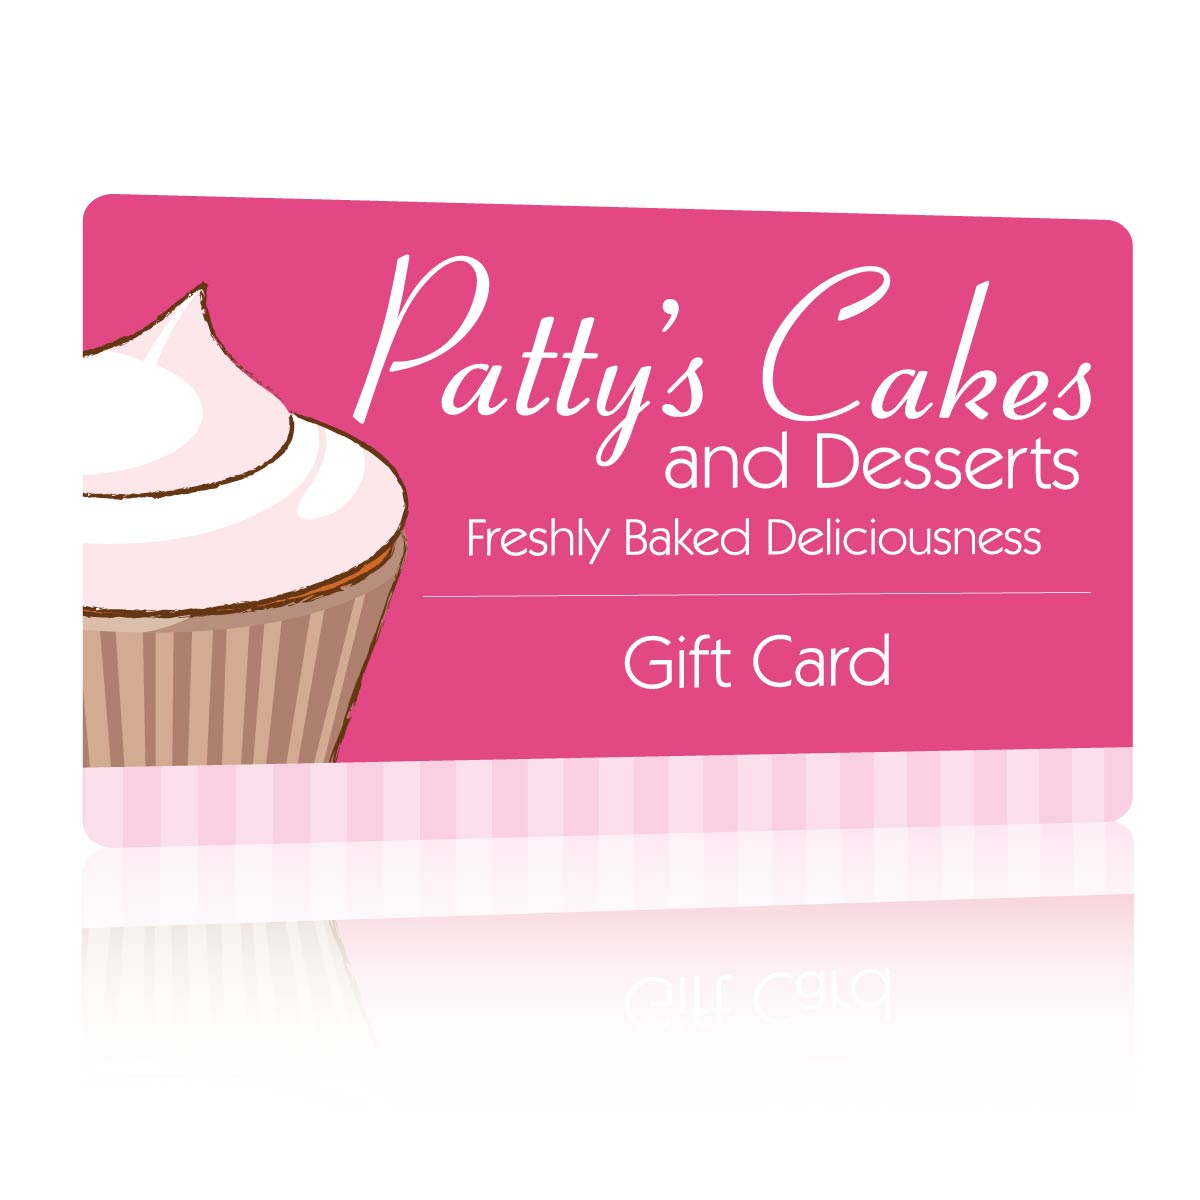 Patty's Cakes Gift Card